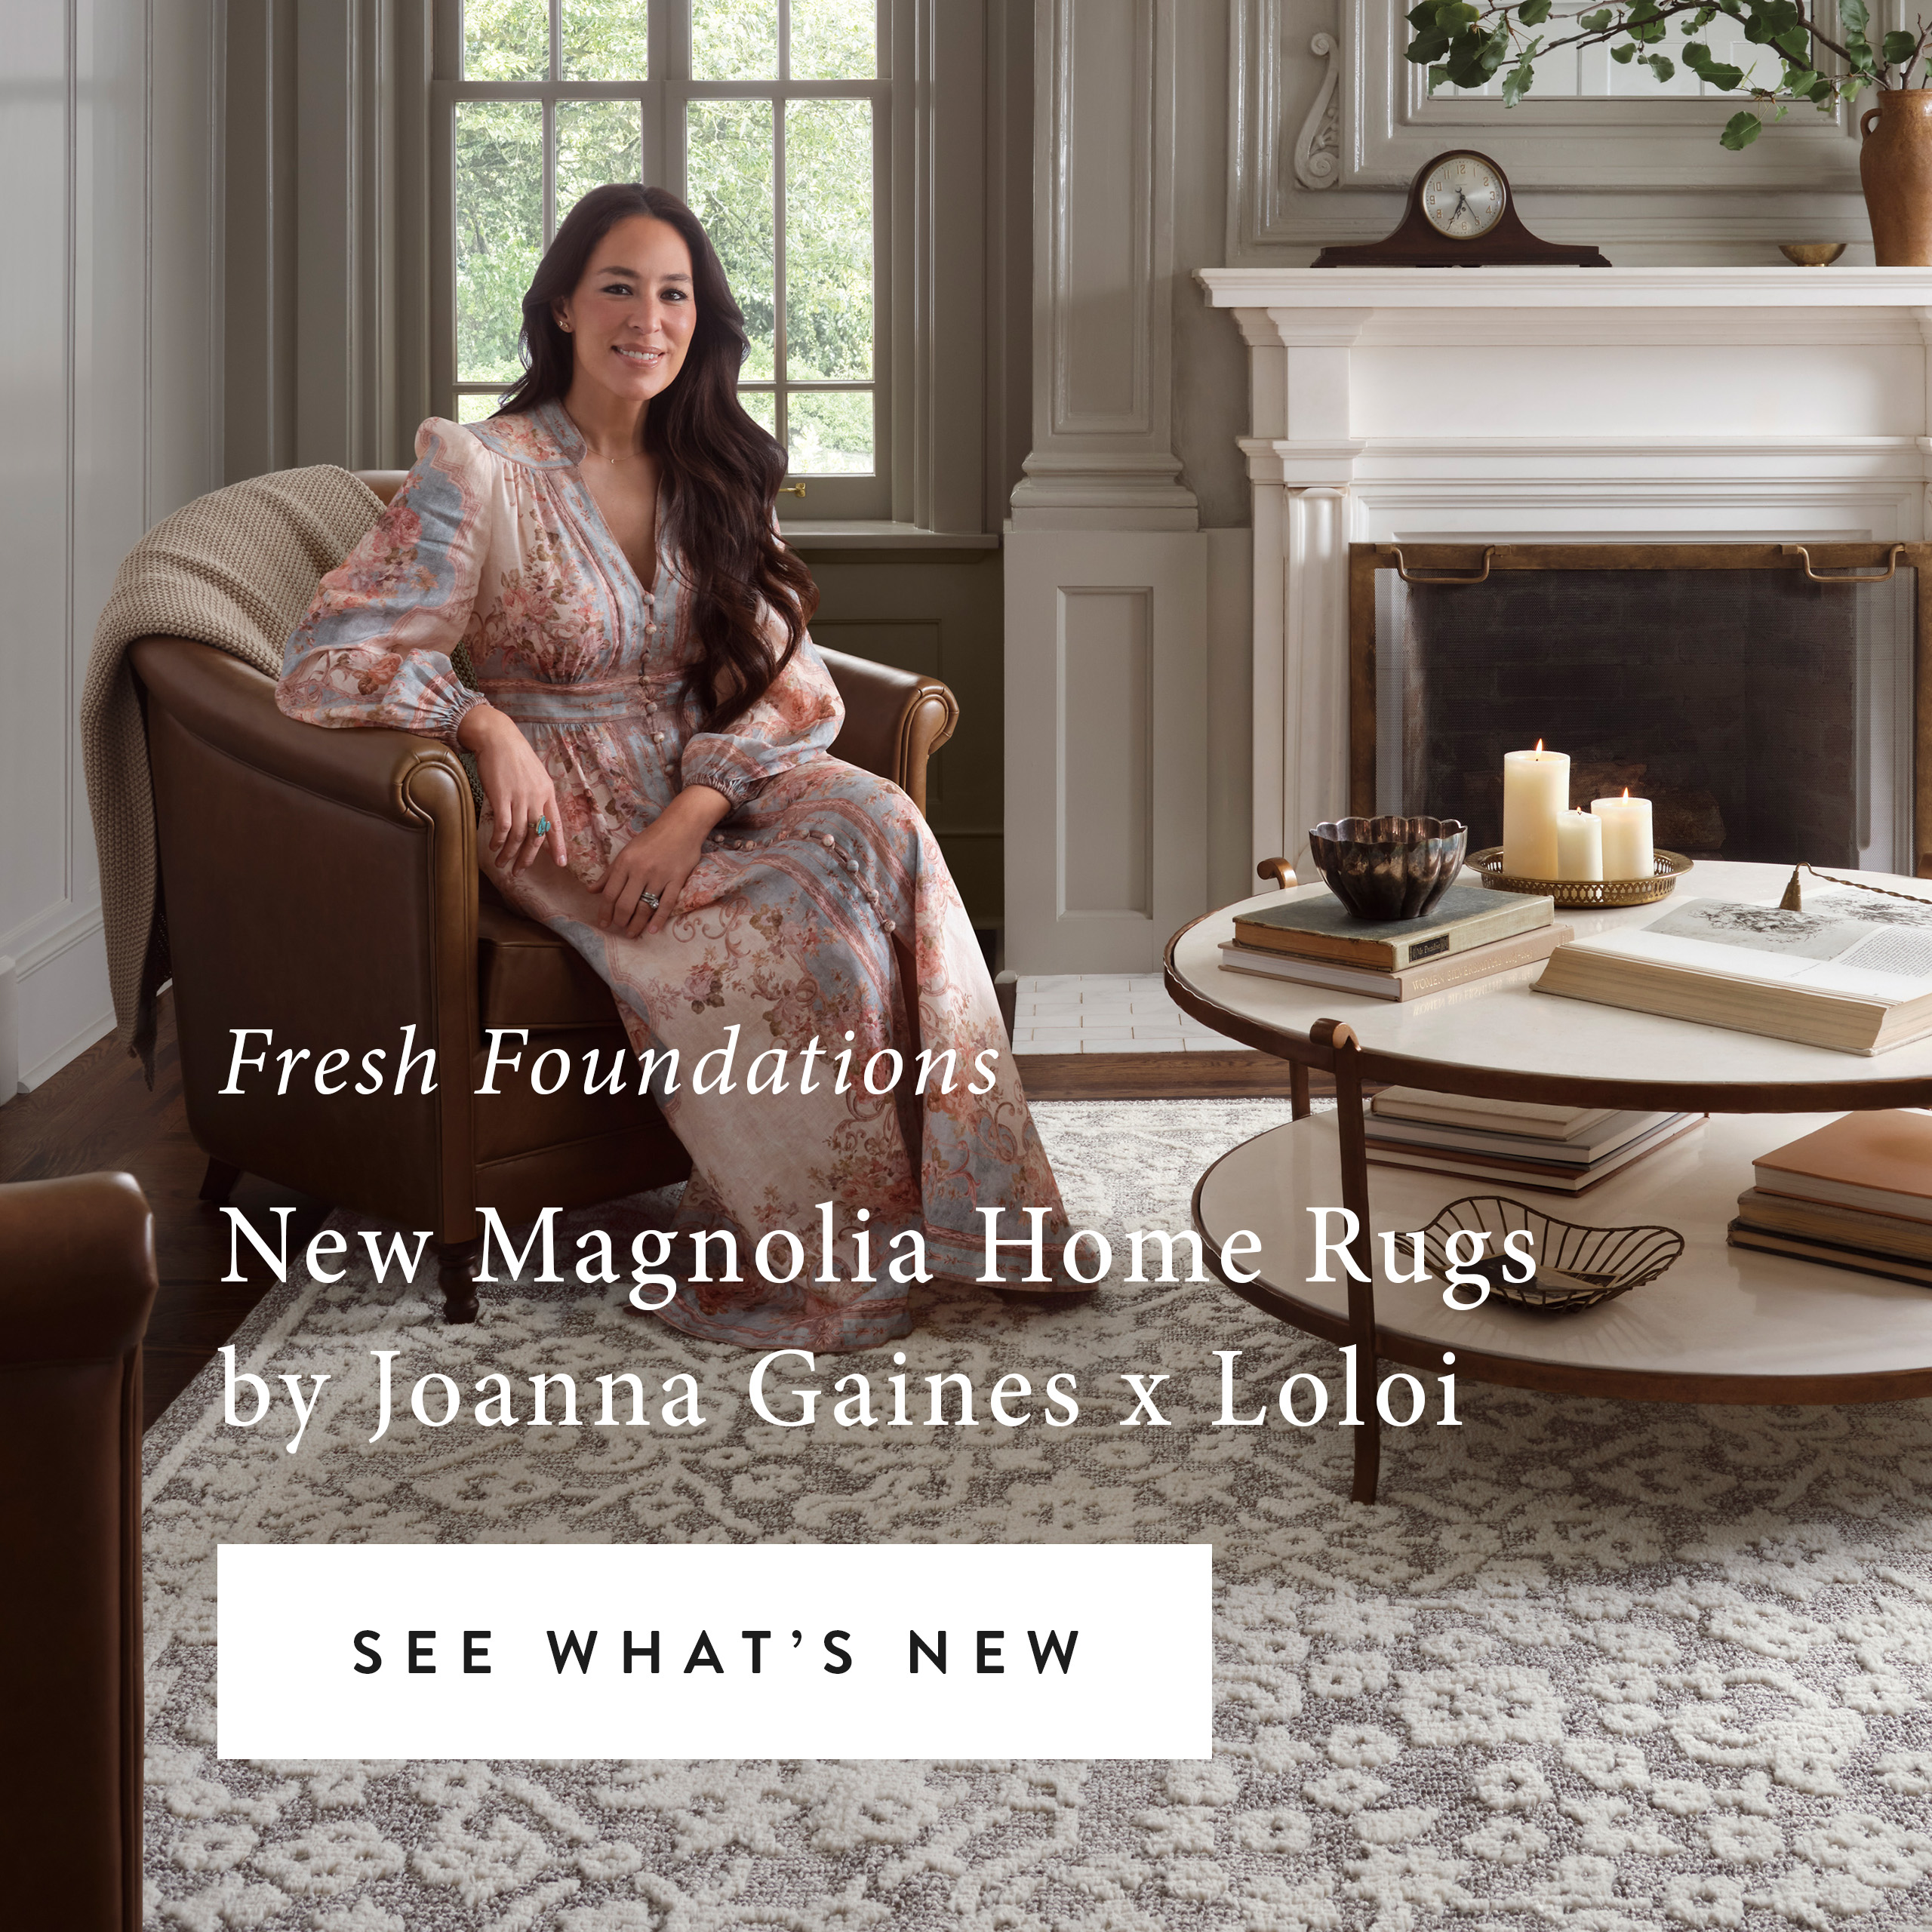 Fresh Foundations - New Magnolia Home Rugs by Joanna Gaines x Loloi - click here to see what's new